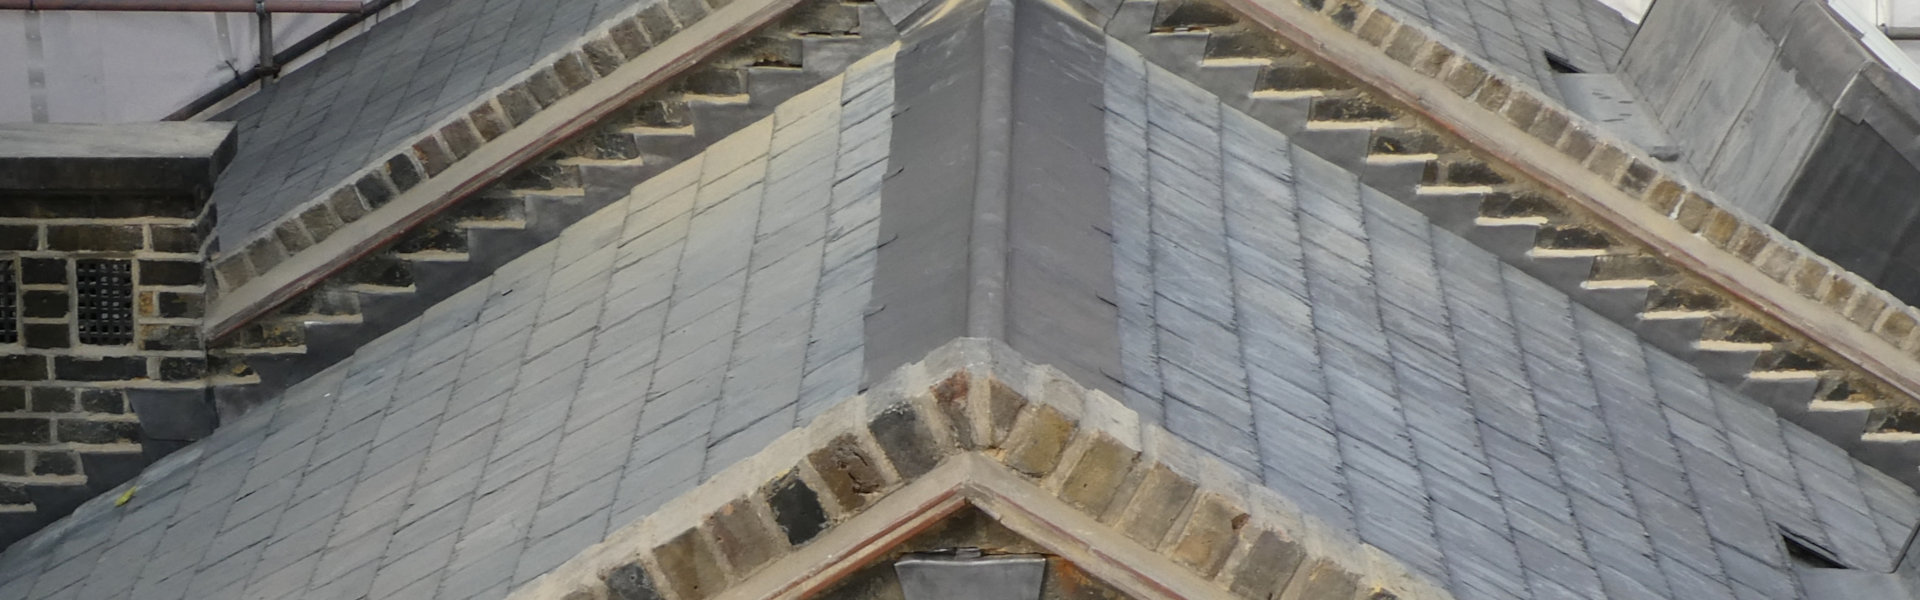 Staggered Roofs